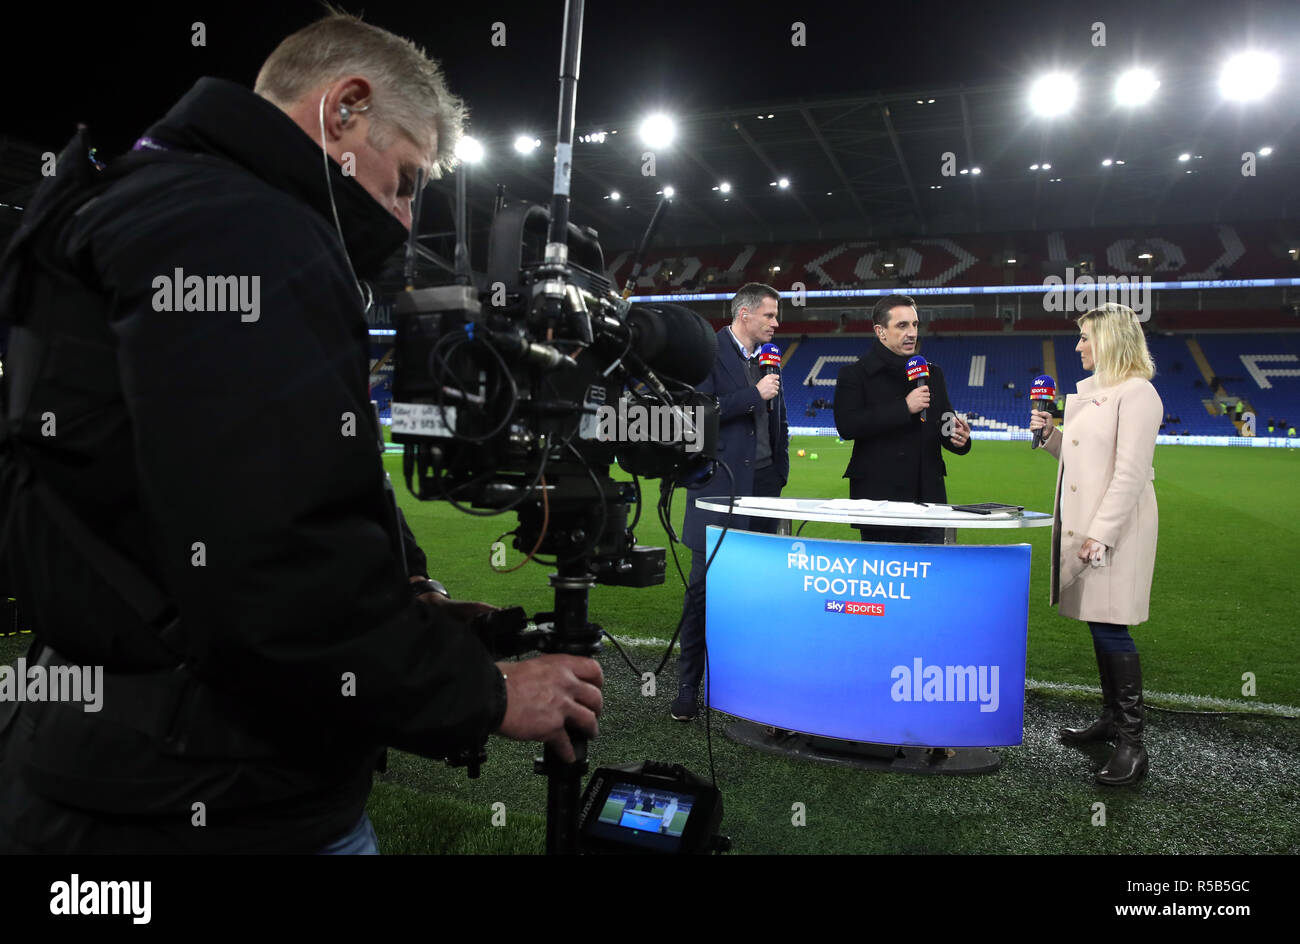 Sky Sports pundits Jamie Carragher (left) and Gary Neville (centre) alongside presenter Kelly Cates before during the Premier League match at Cardiff City Stadium